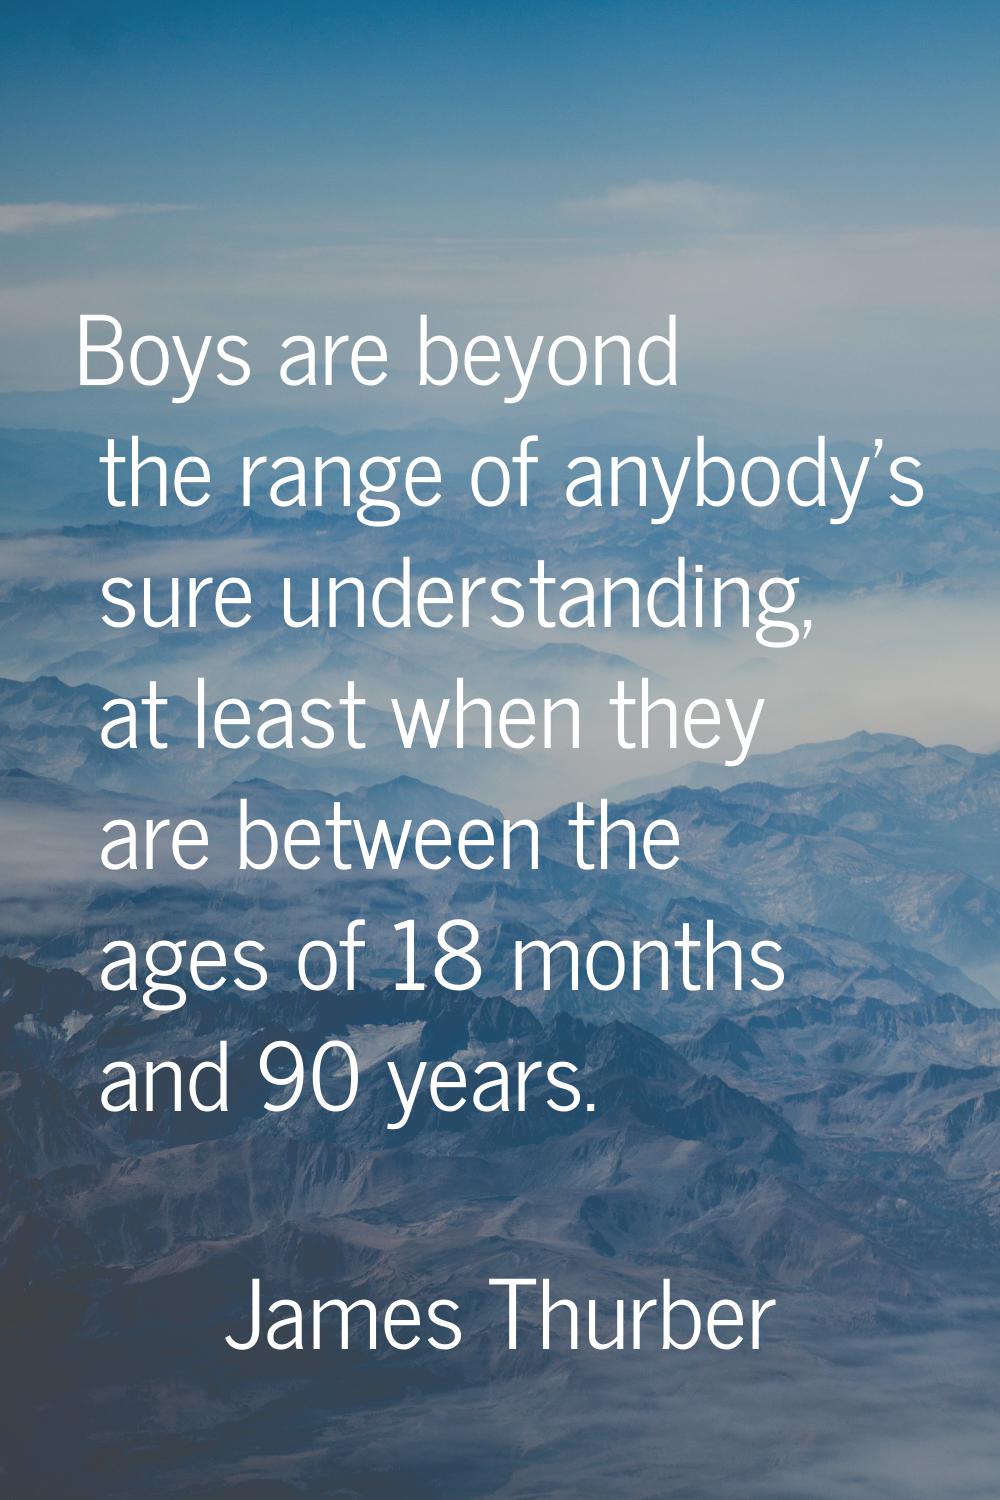 Boys are beyond the range of anybody's sure understanding, at least when they are between the ages 